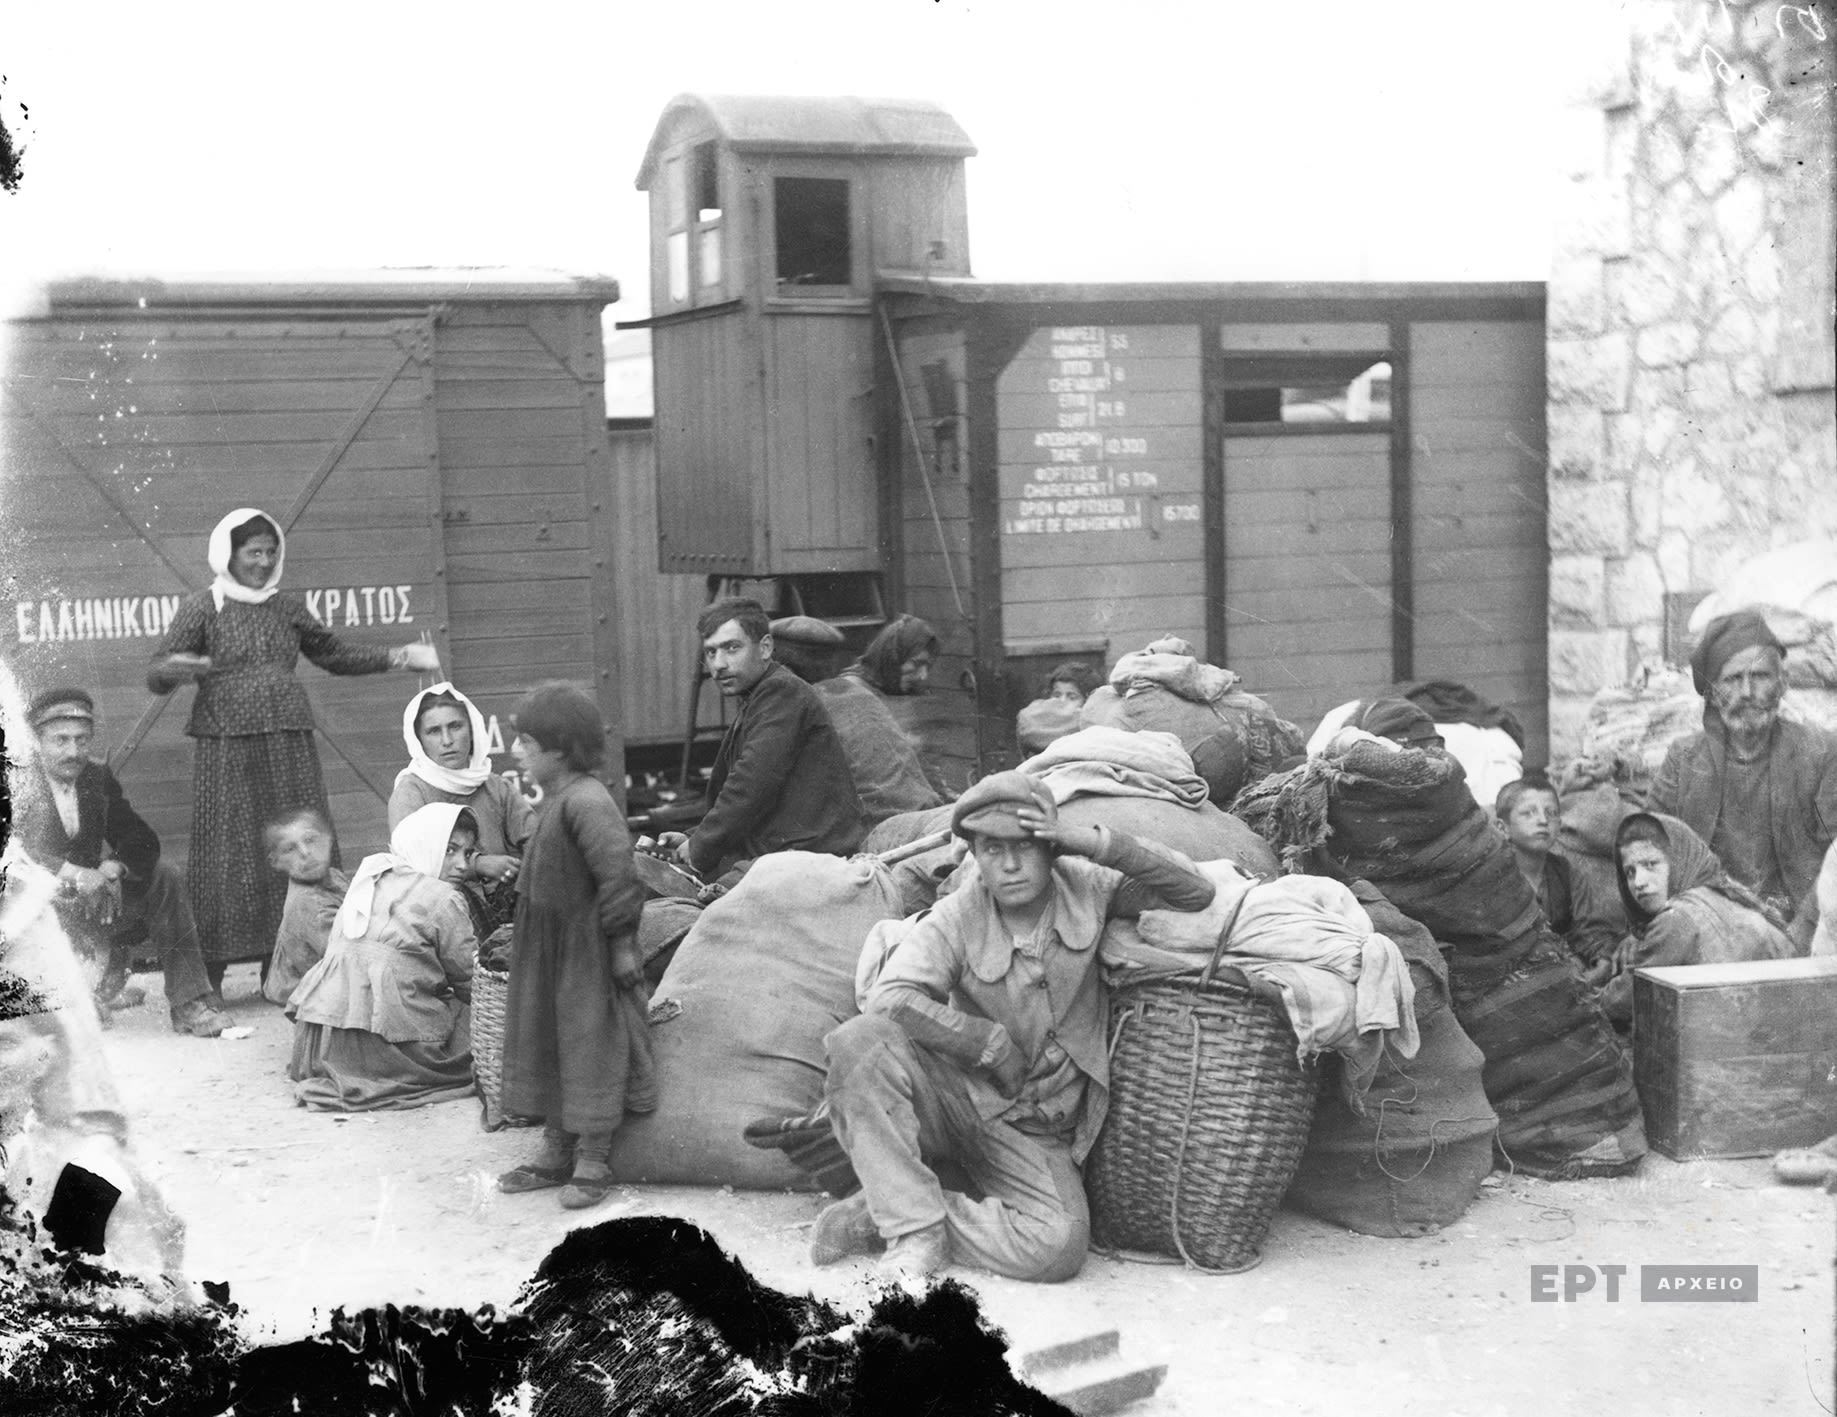 Group of people sitting in front of a train carriage. They have sacks and baskets with their belongings. 